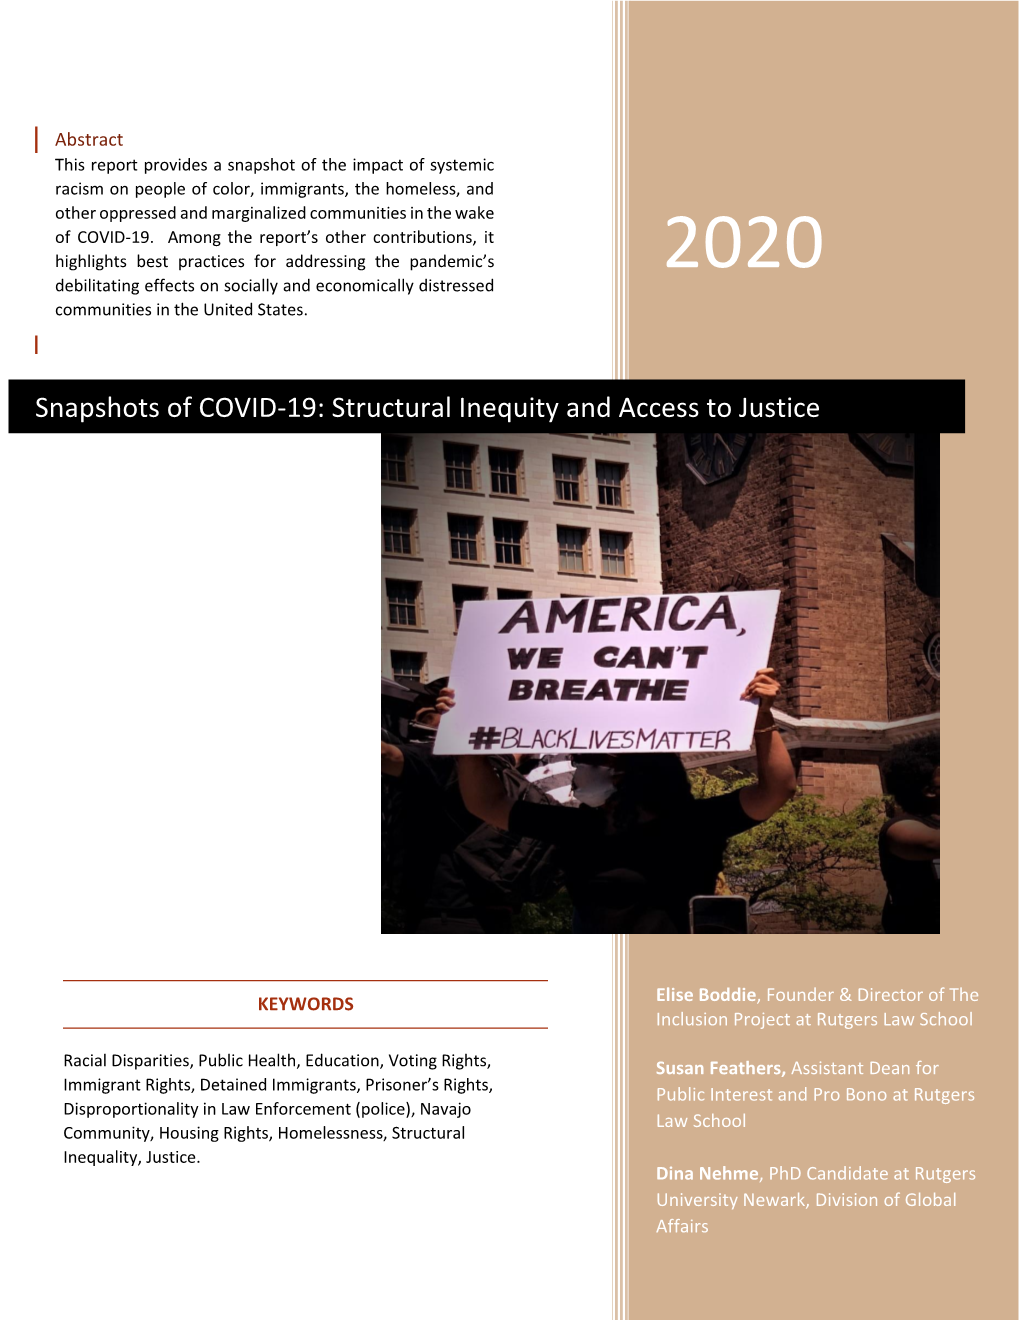 Snapshots of COVID-19: Structural Inequity and Access to Justice